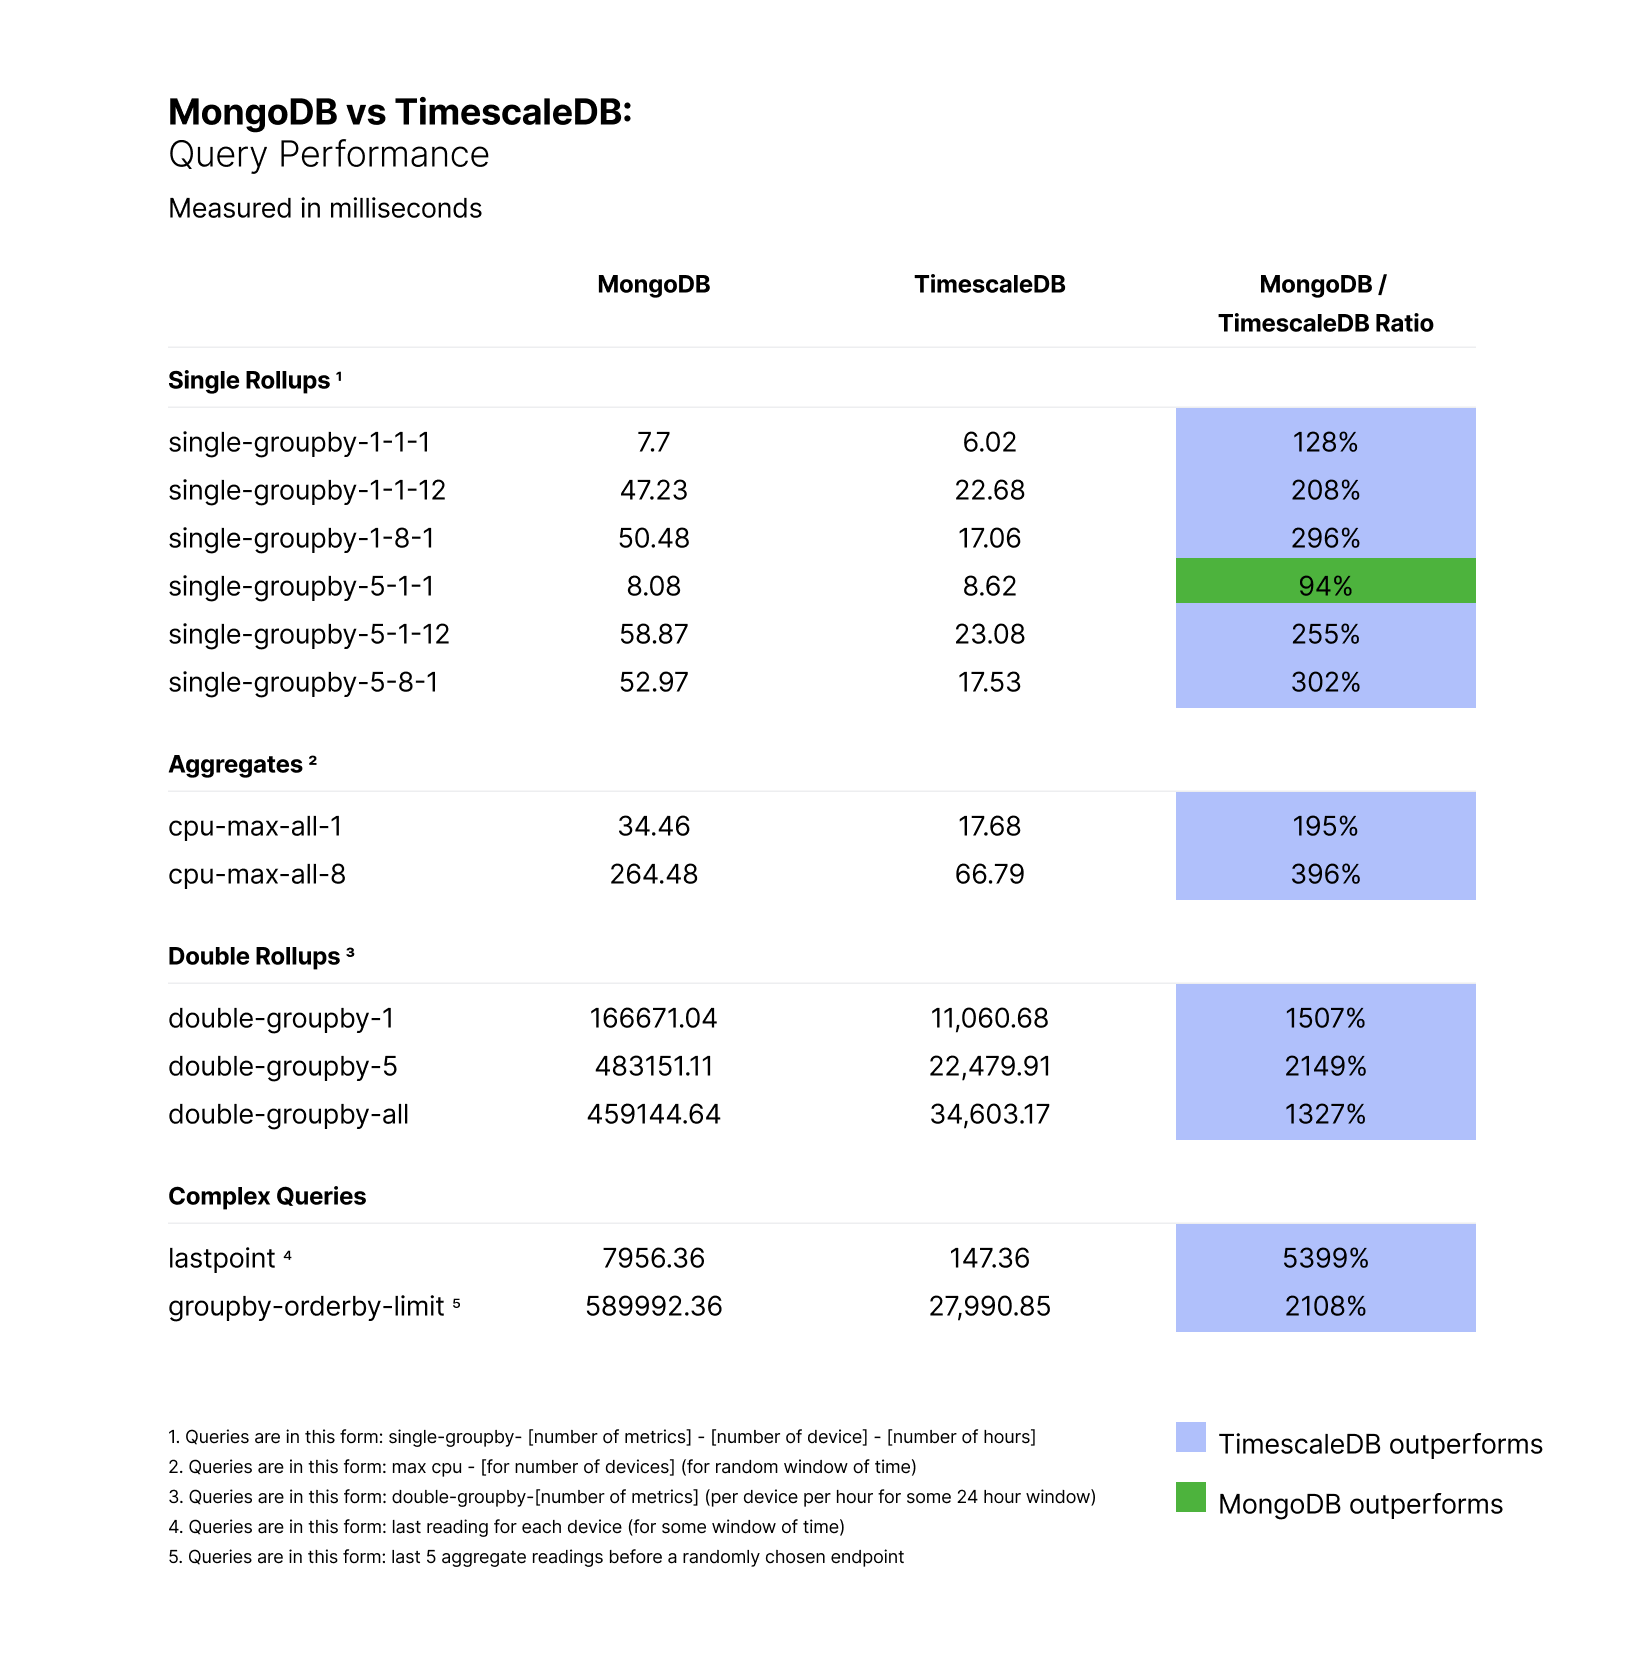 TimescaleDB showerd 200% to 5400% faster queries than MongoDB during our benchmark